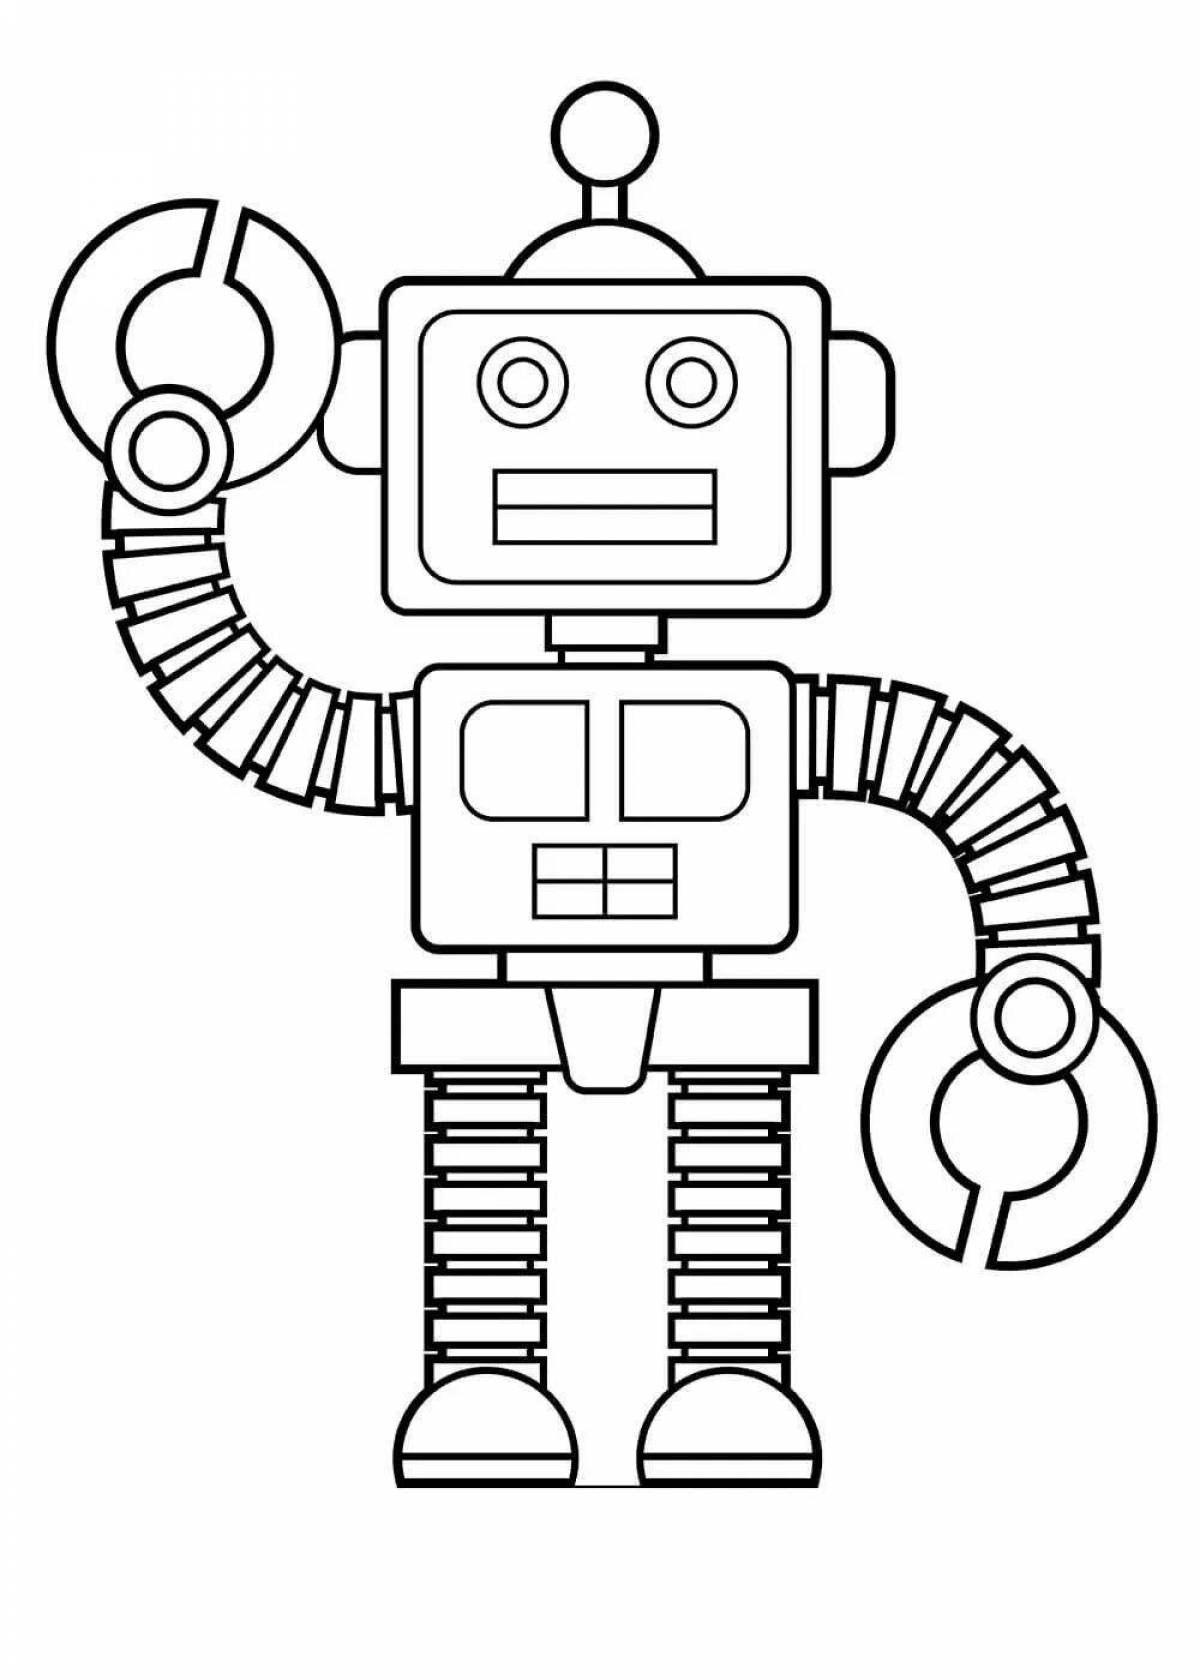 Coloring page glowing robot with siren head